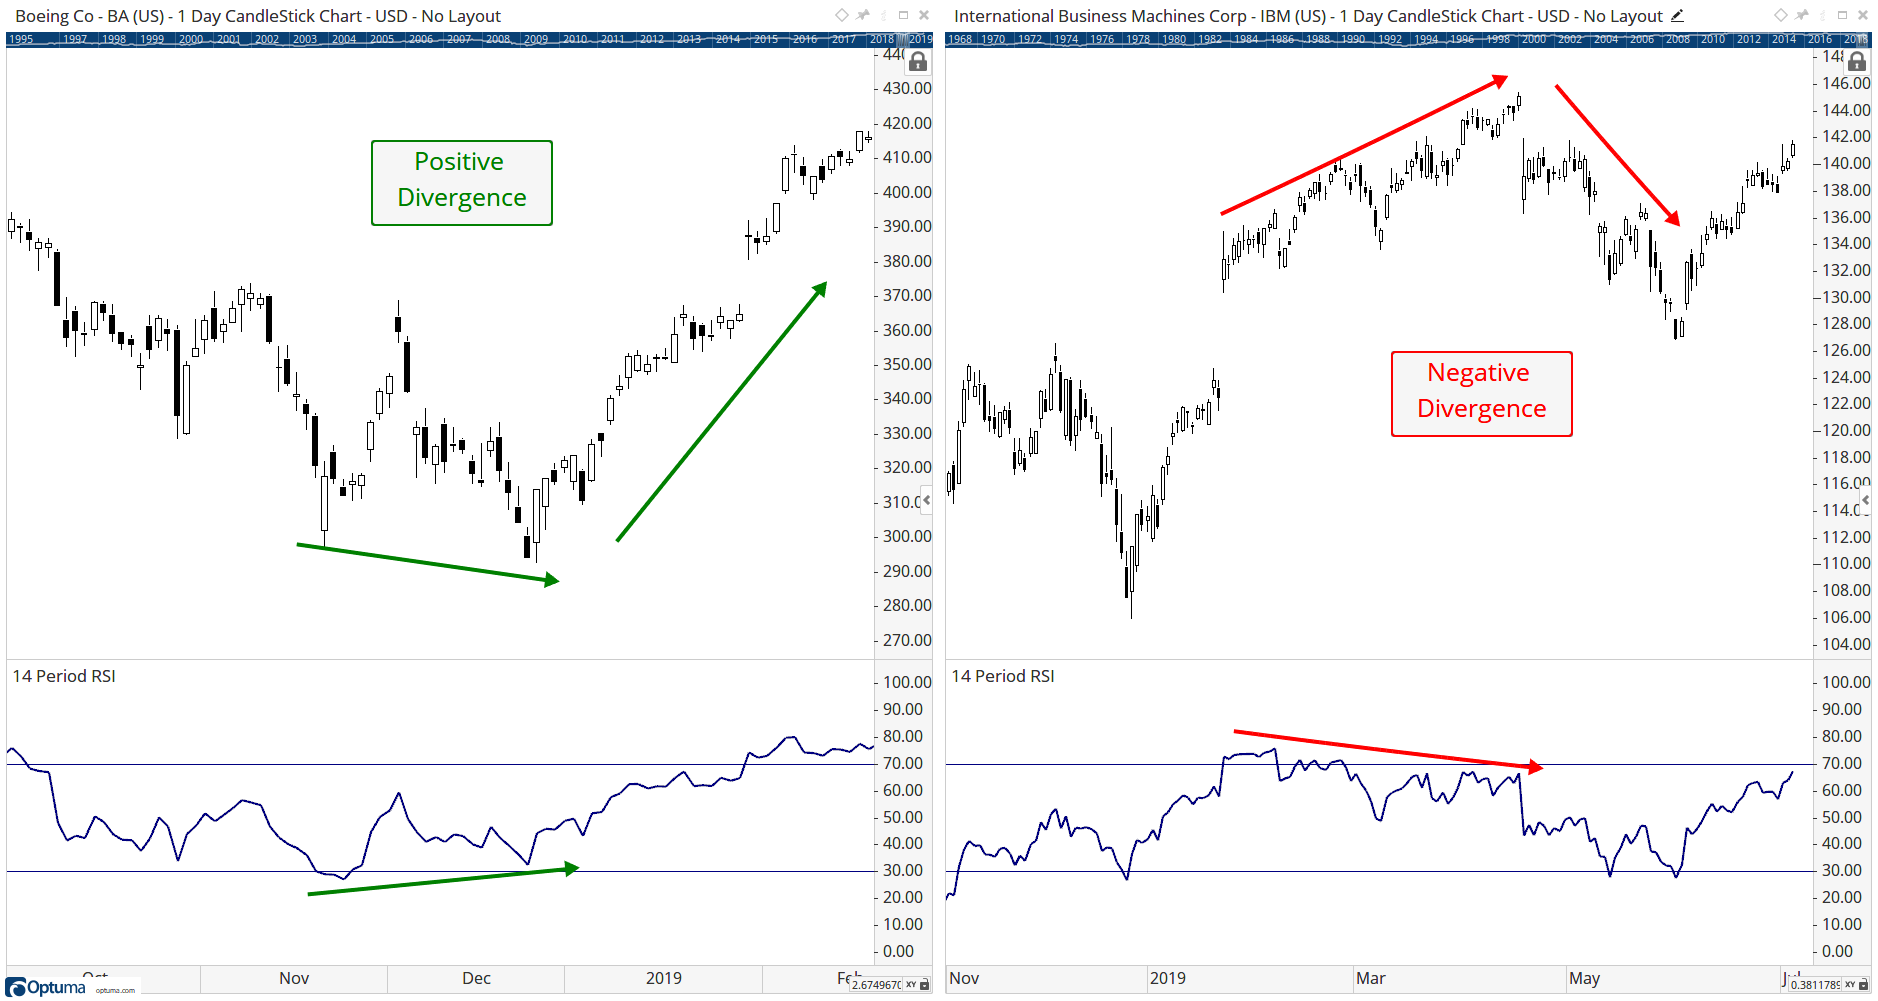 Positive and Negative Divergence